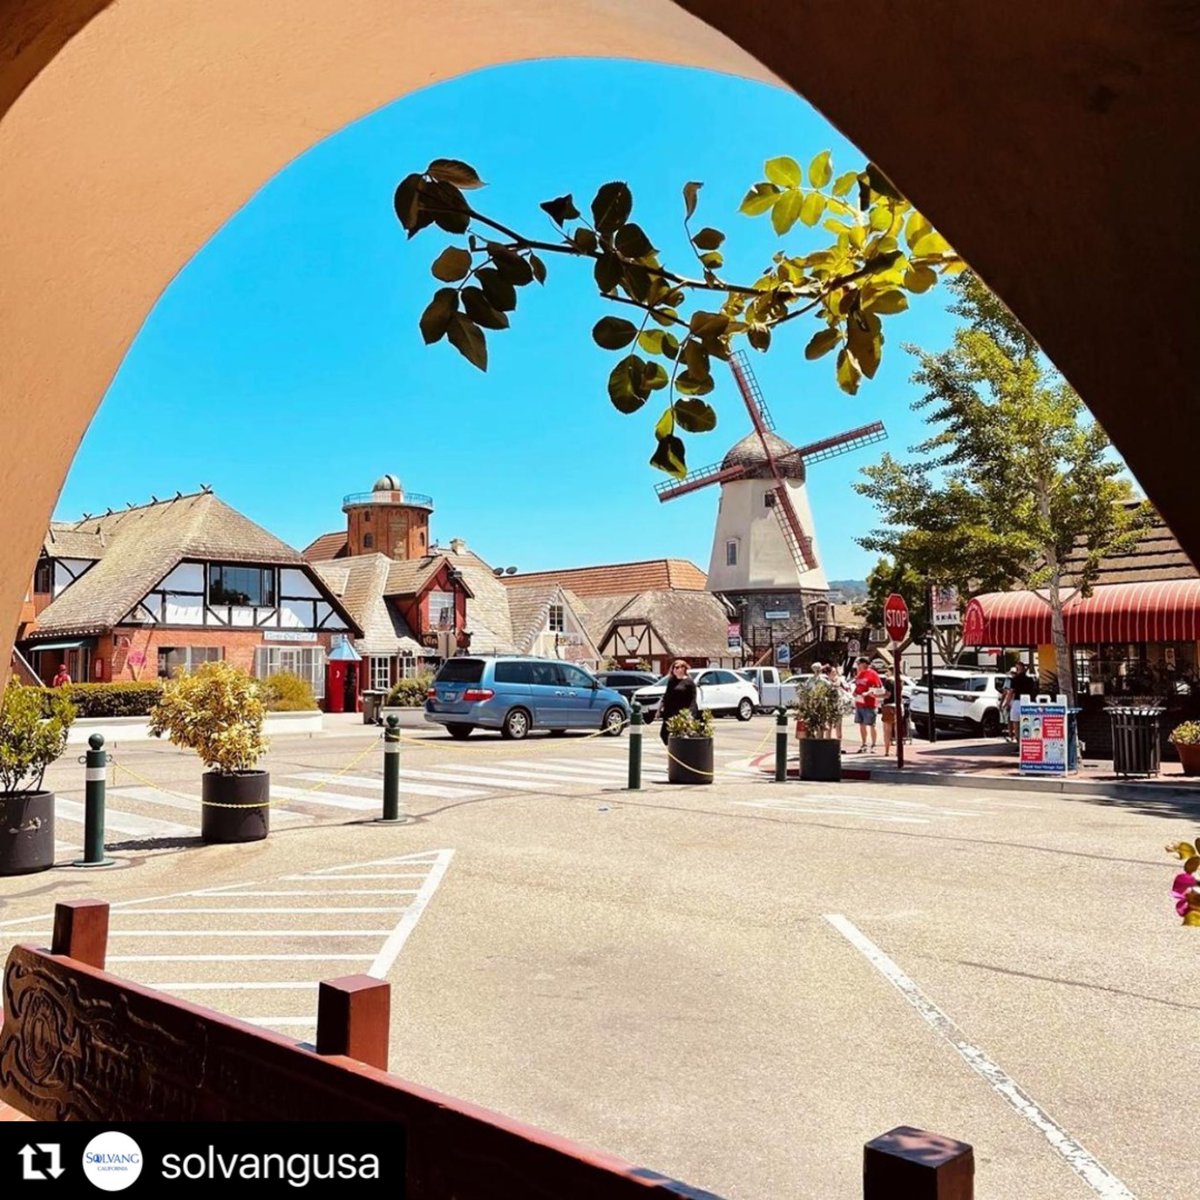 We hope your future plans involve a trip to #Solvang, the perfect blast from the past!! 
・・・
Did you travel back in time? Or did you just travel to Solvang? 🤷‍♀️⁠
⁠
📷IG @gudthingsinlife #solvangusa⁠
⁠
⁠
⁠
⁠
⁠
⁠
⁠
#solvangcalifornia #solvangca 

#Repost @solvangusa